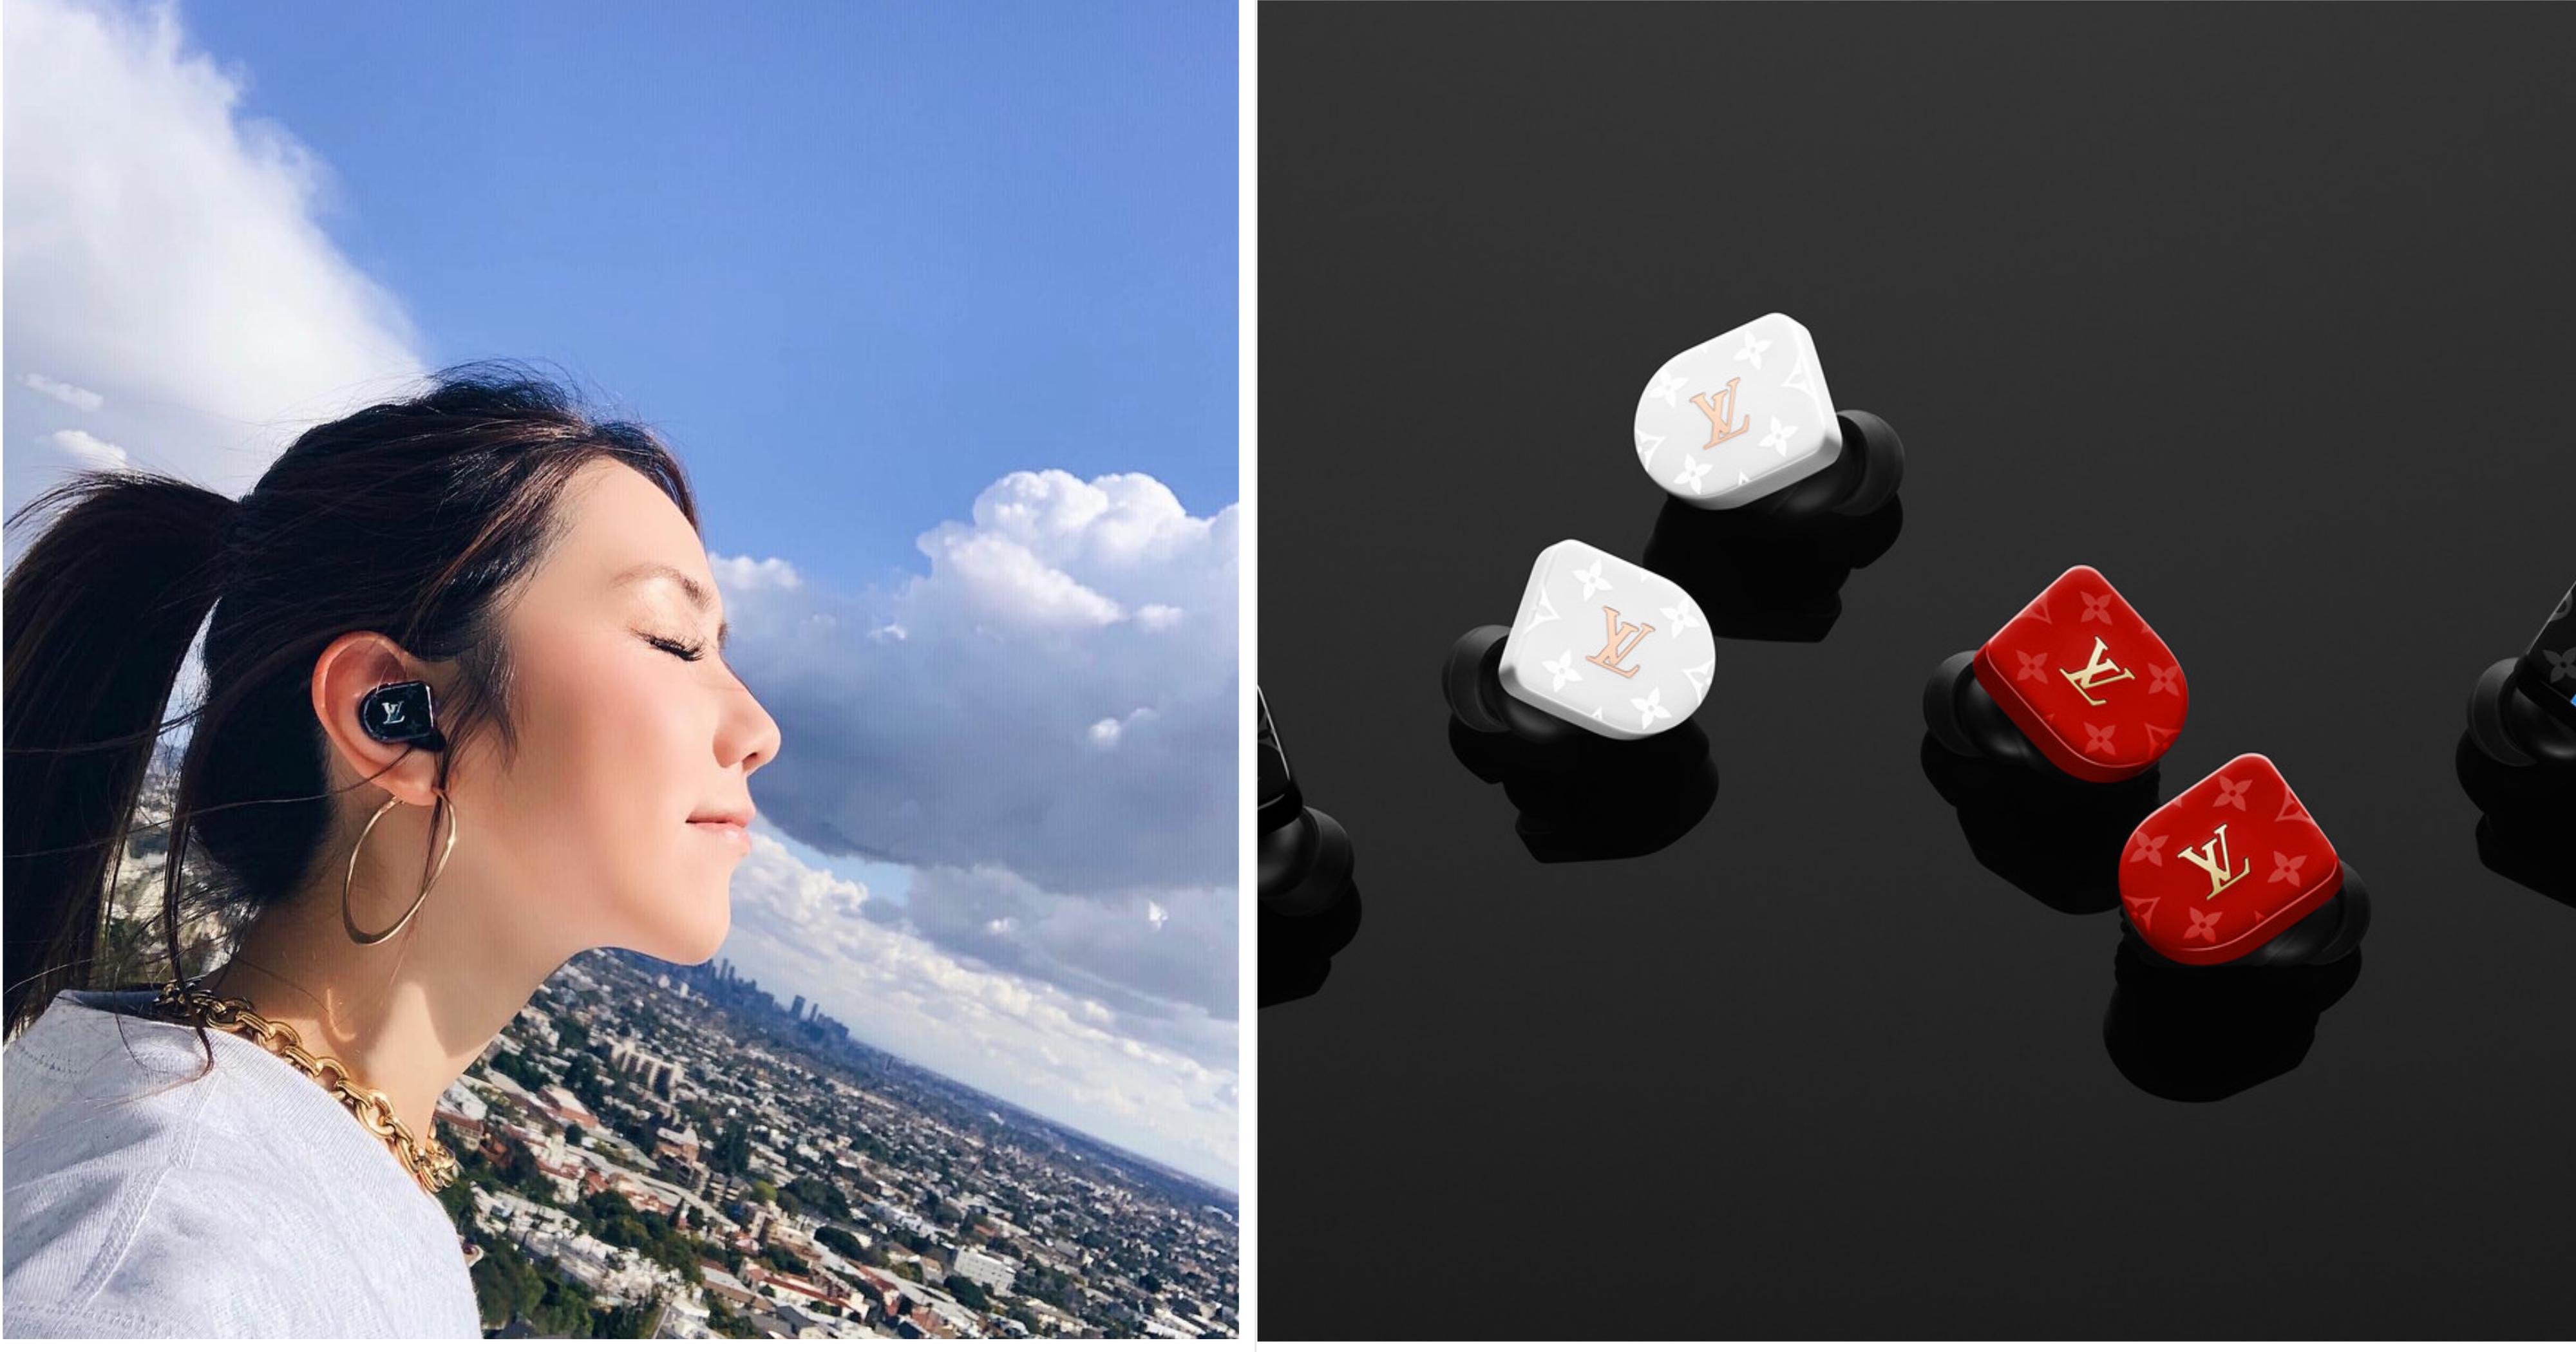 Louis Vuitton's wireless earphones available in S'pore for S$1,580